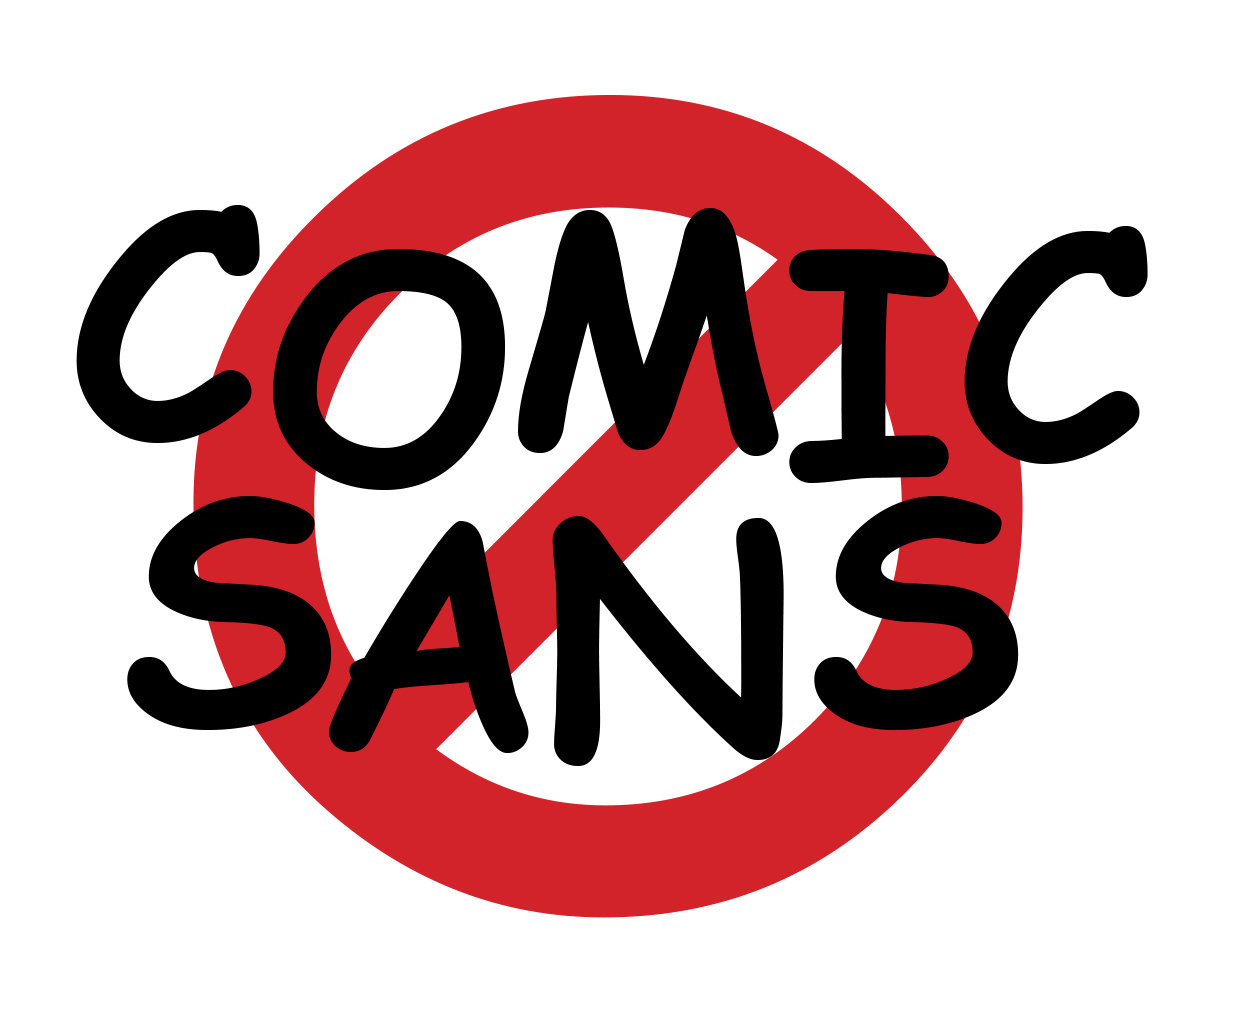 "COMIC SANS" written in black capitals across a slashed red "forbidden" circle